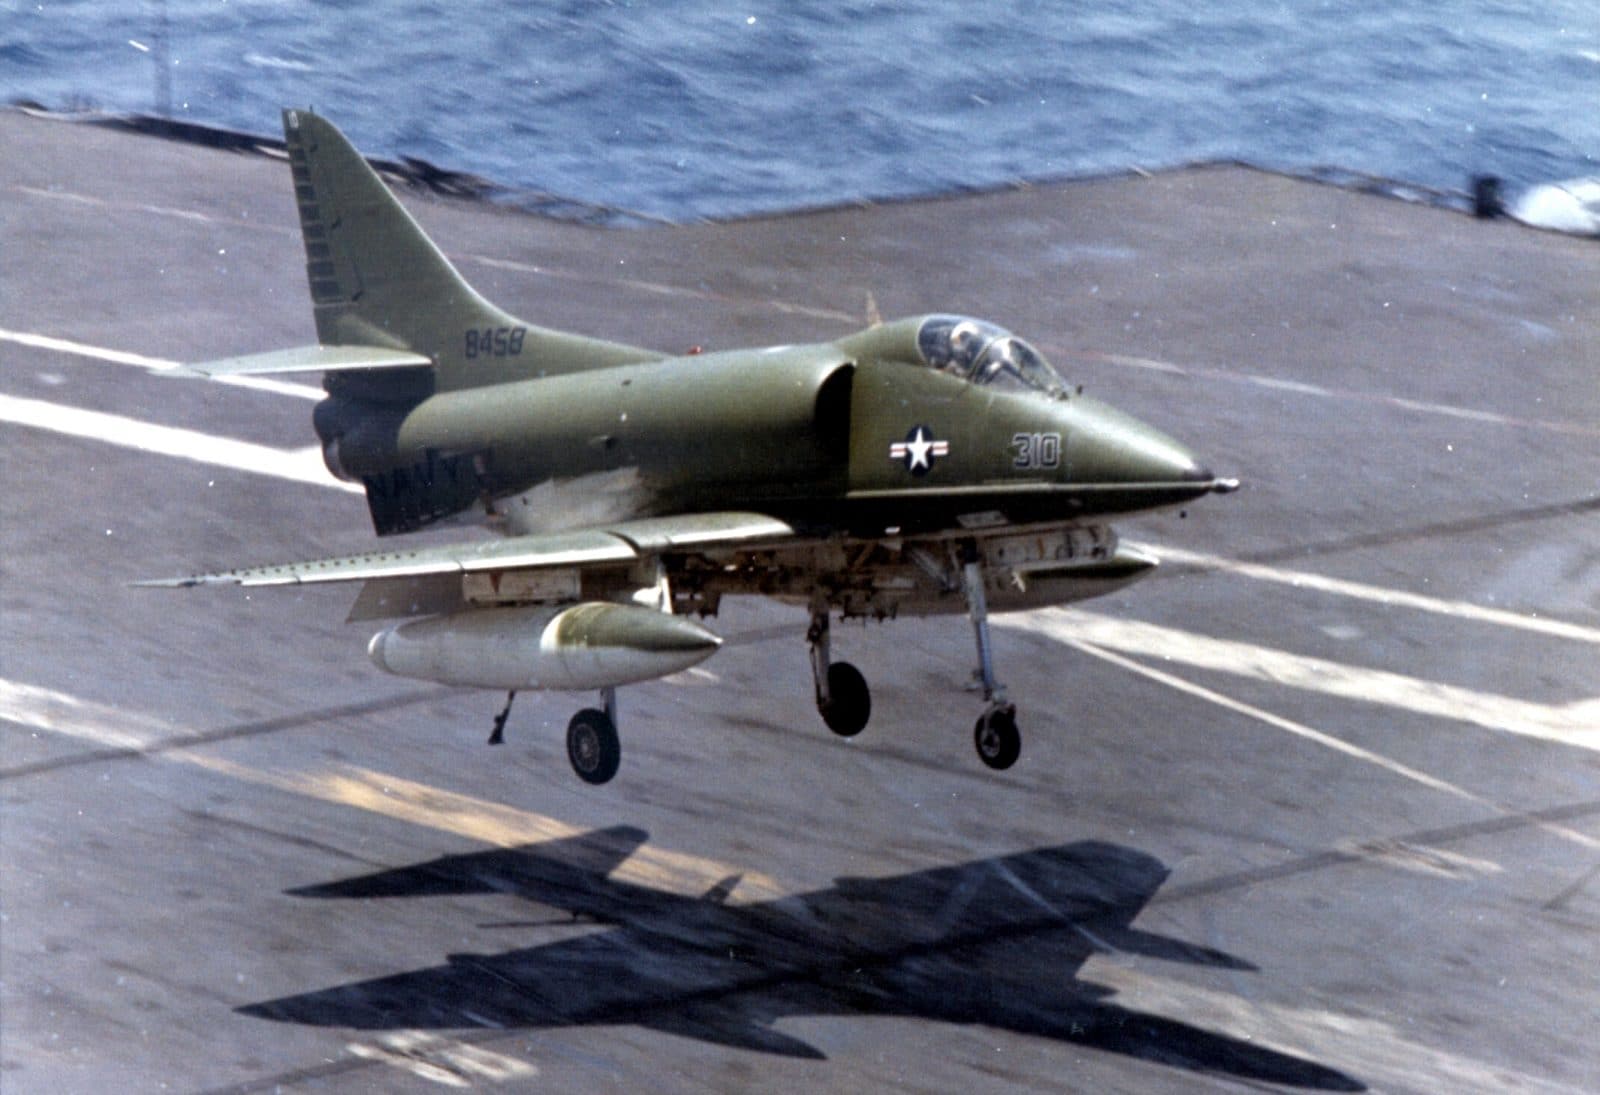 Skyhawk about to touch down on carrier.